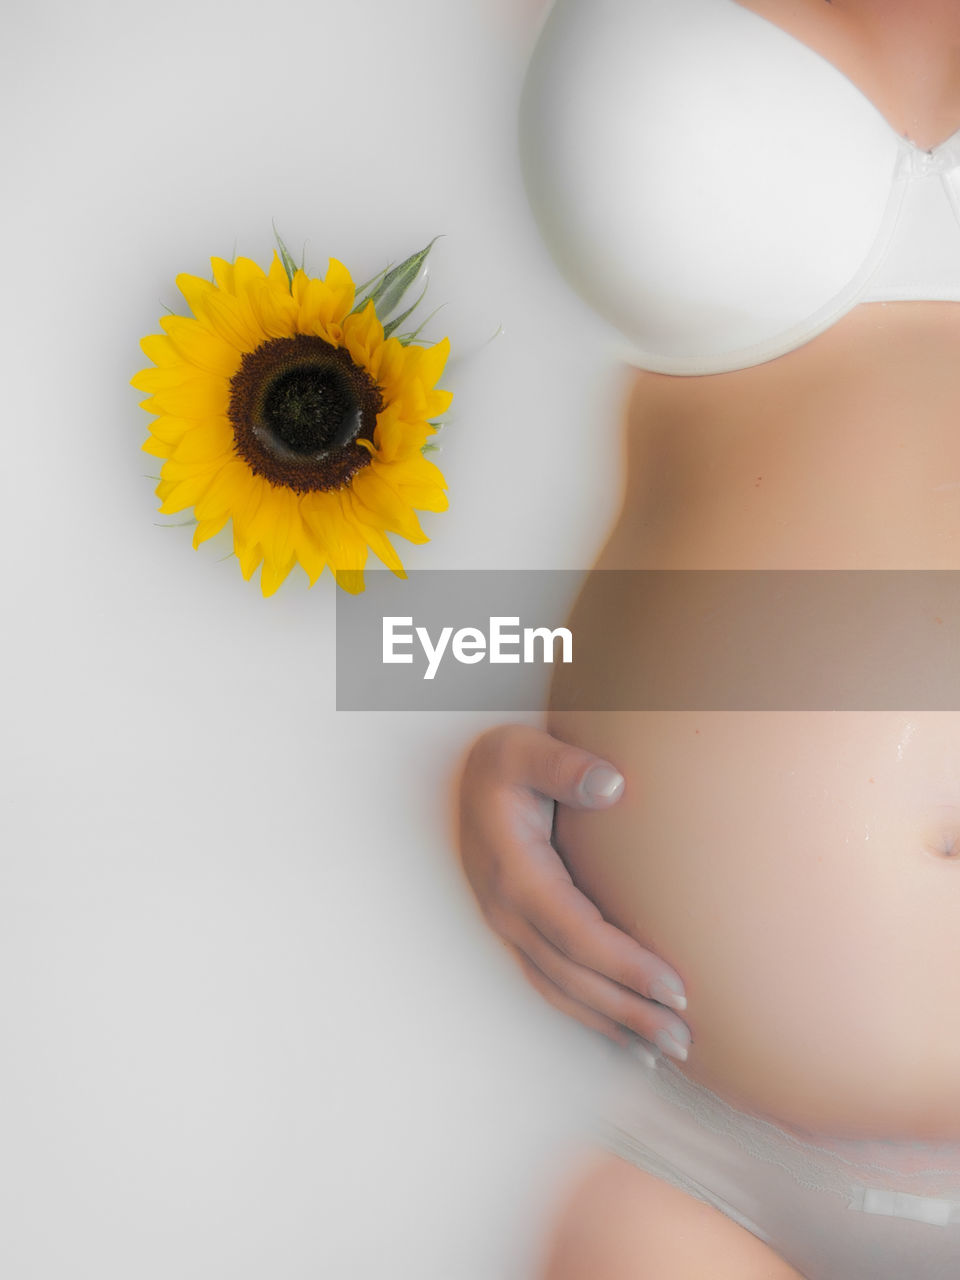 Midsection of pregnant woman with hand on abdomen by sunflower